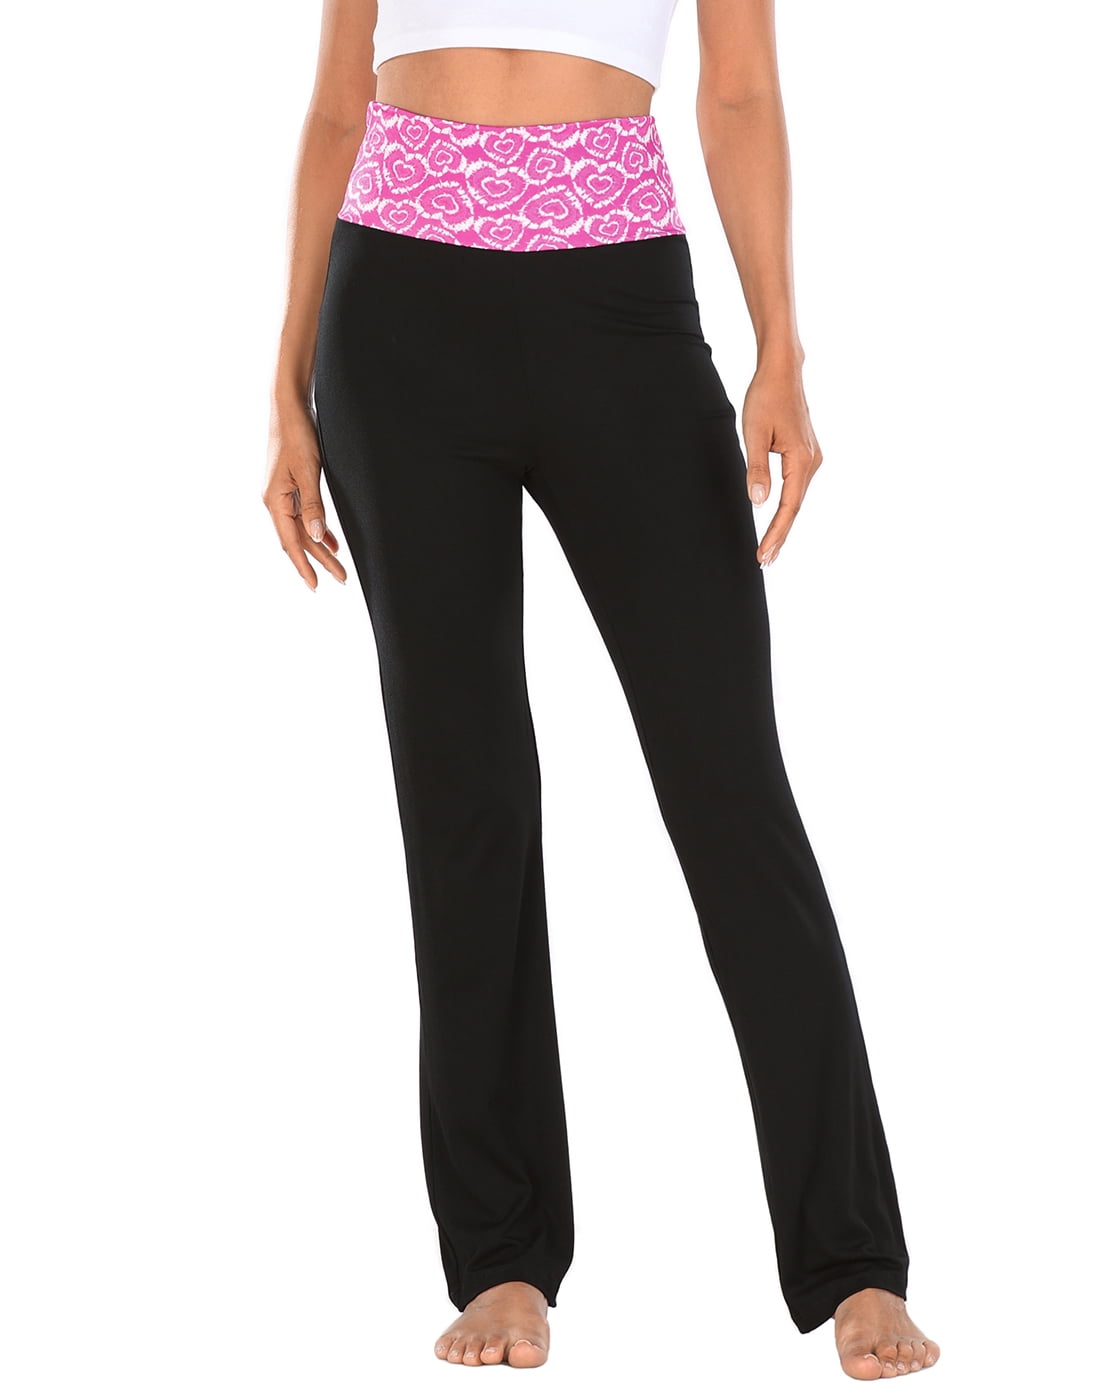 Run to vs pink !! The og foldover flare pants are back they're so c, Fold  Over Flare Pants